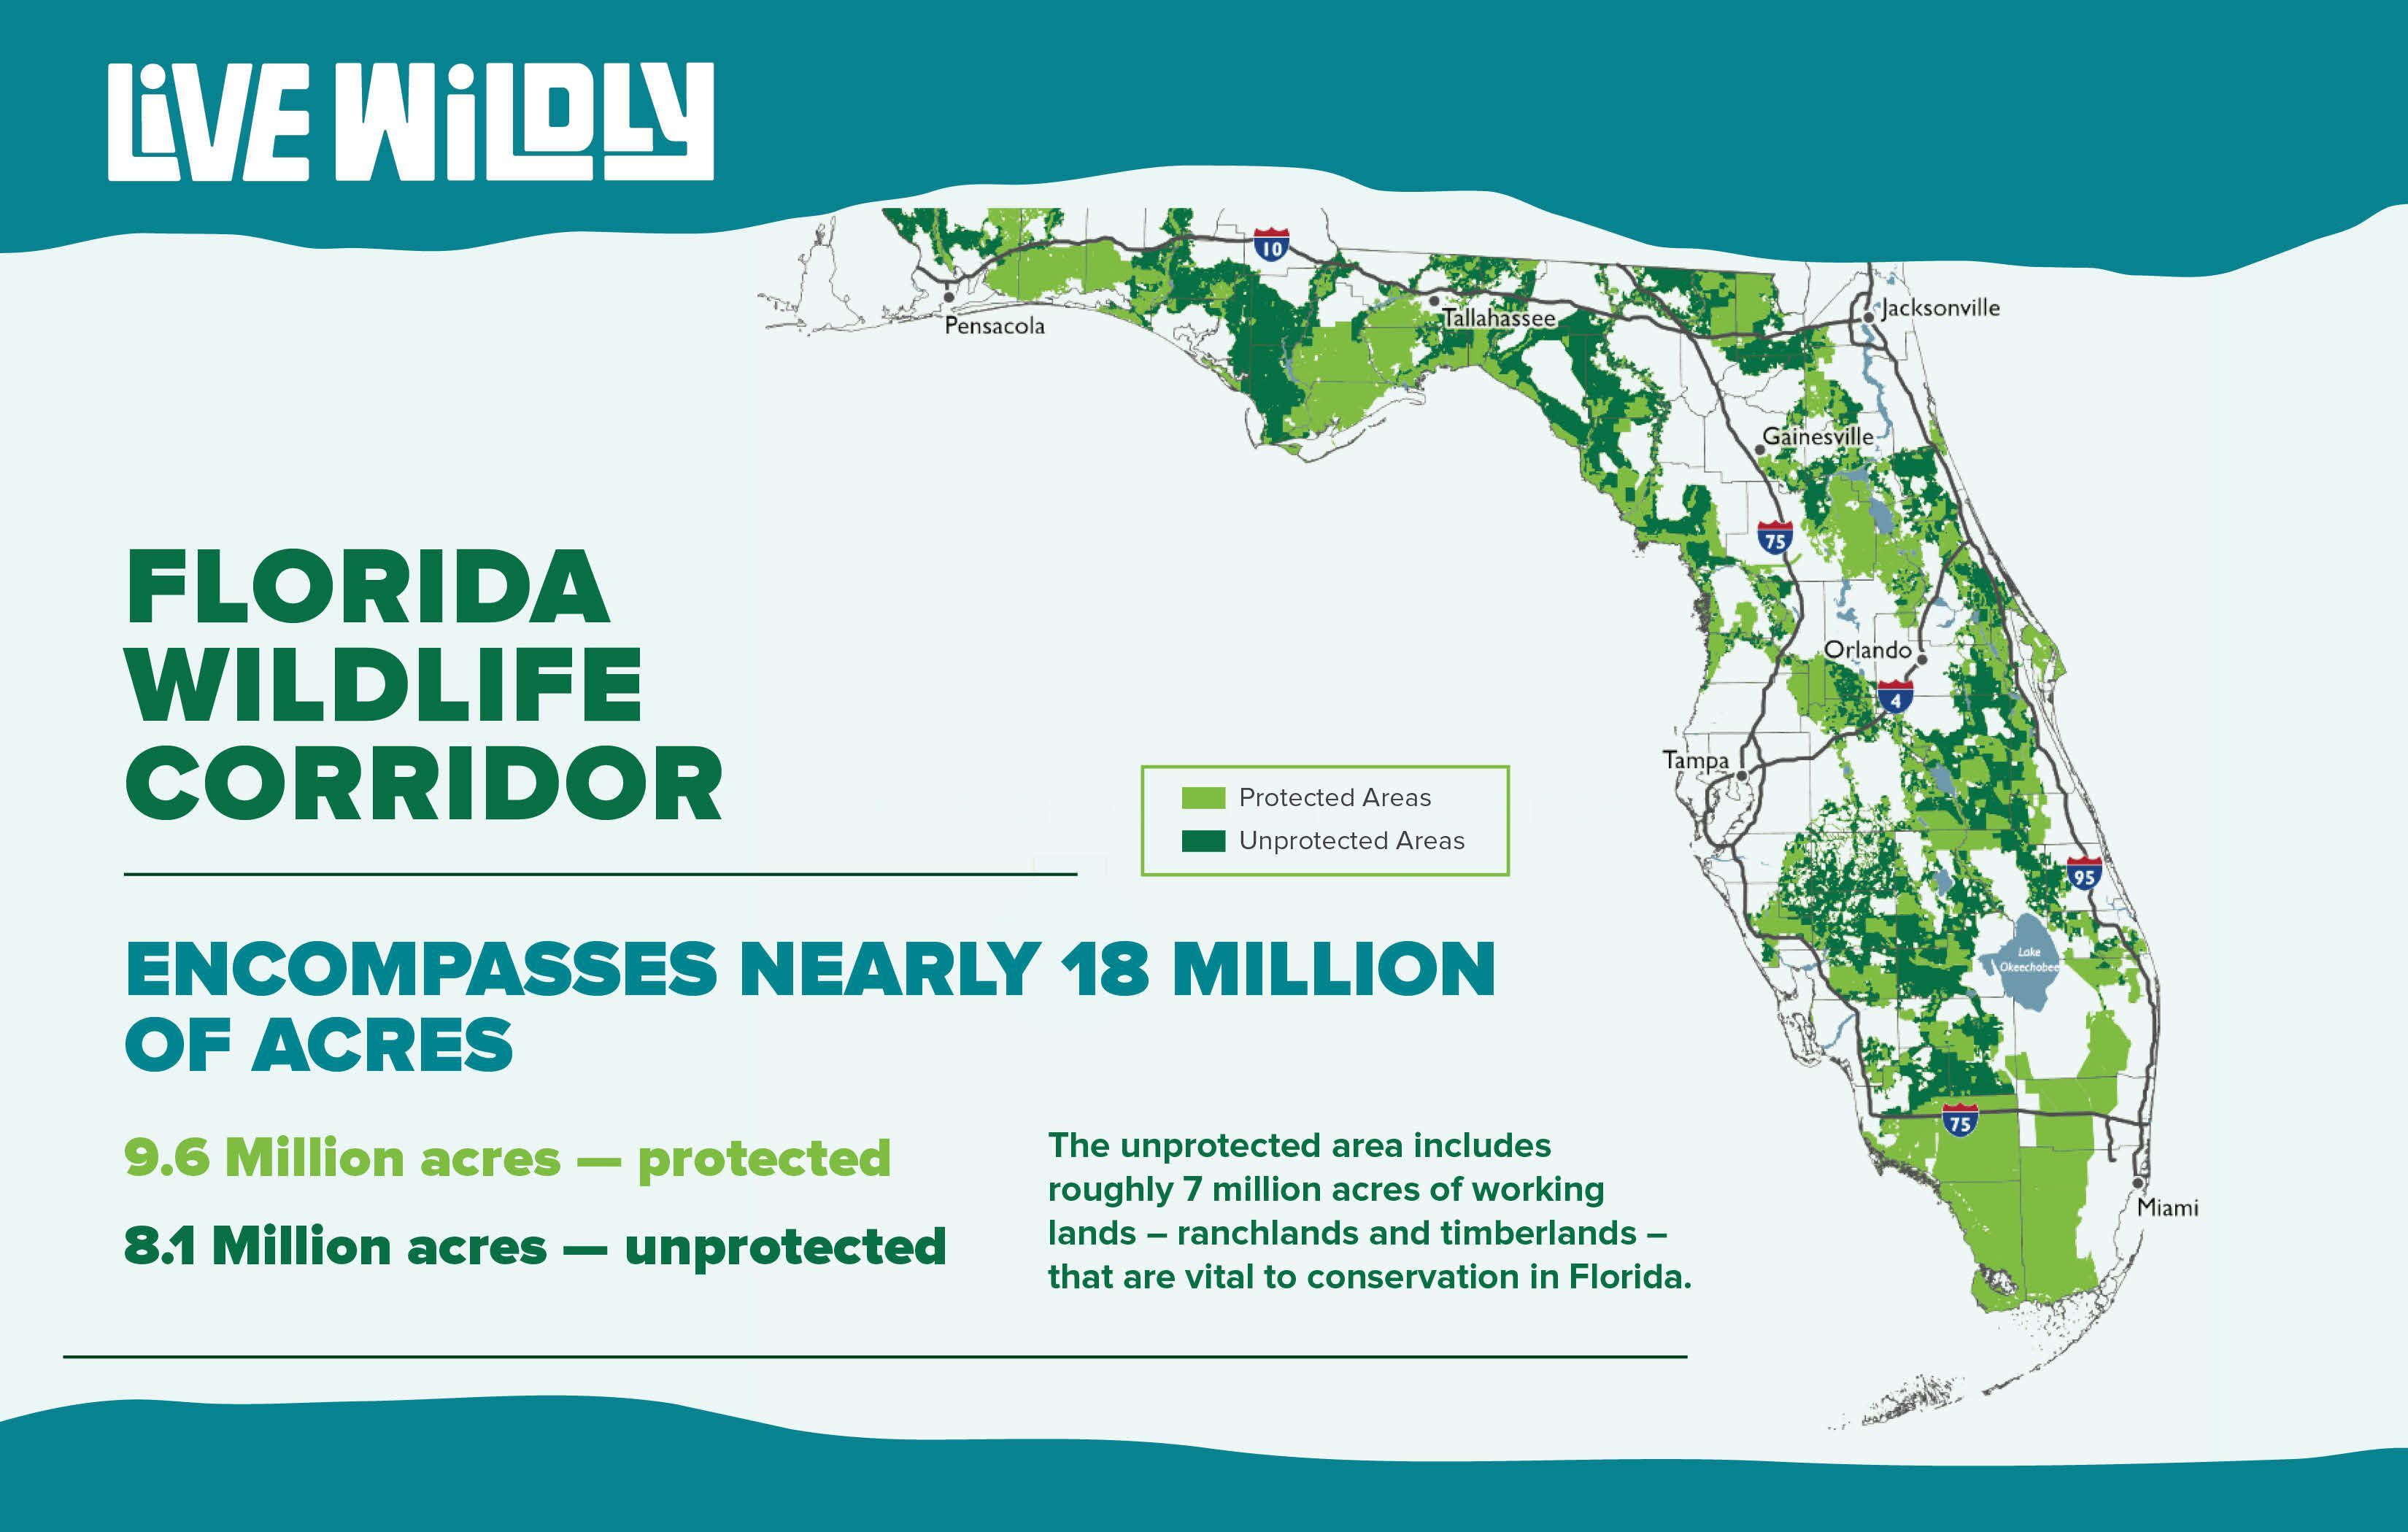 An ad campaign from Live Wildly with statistics about the Florida Wildlife Corridor.